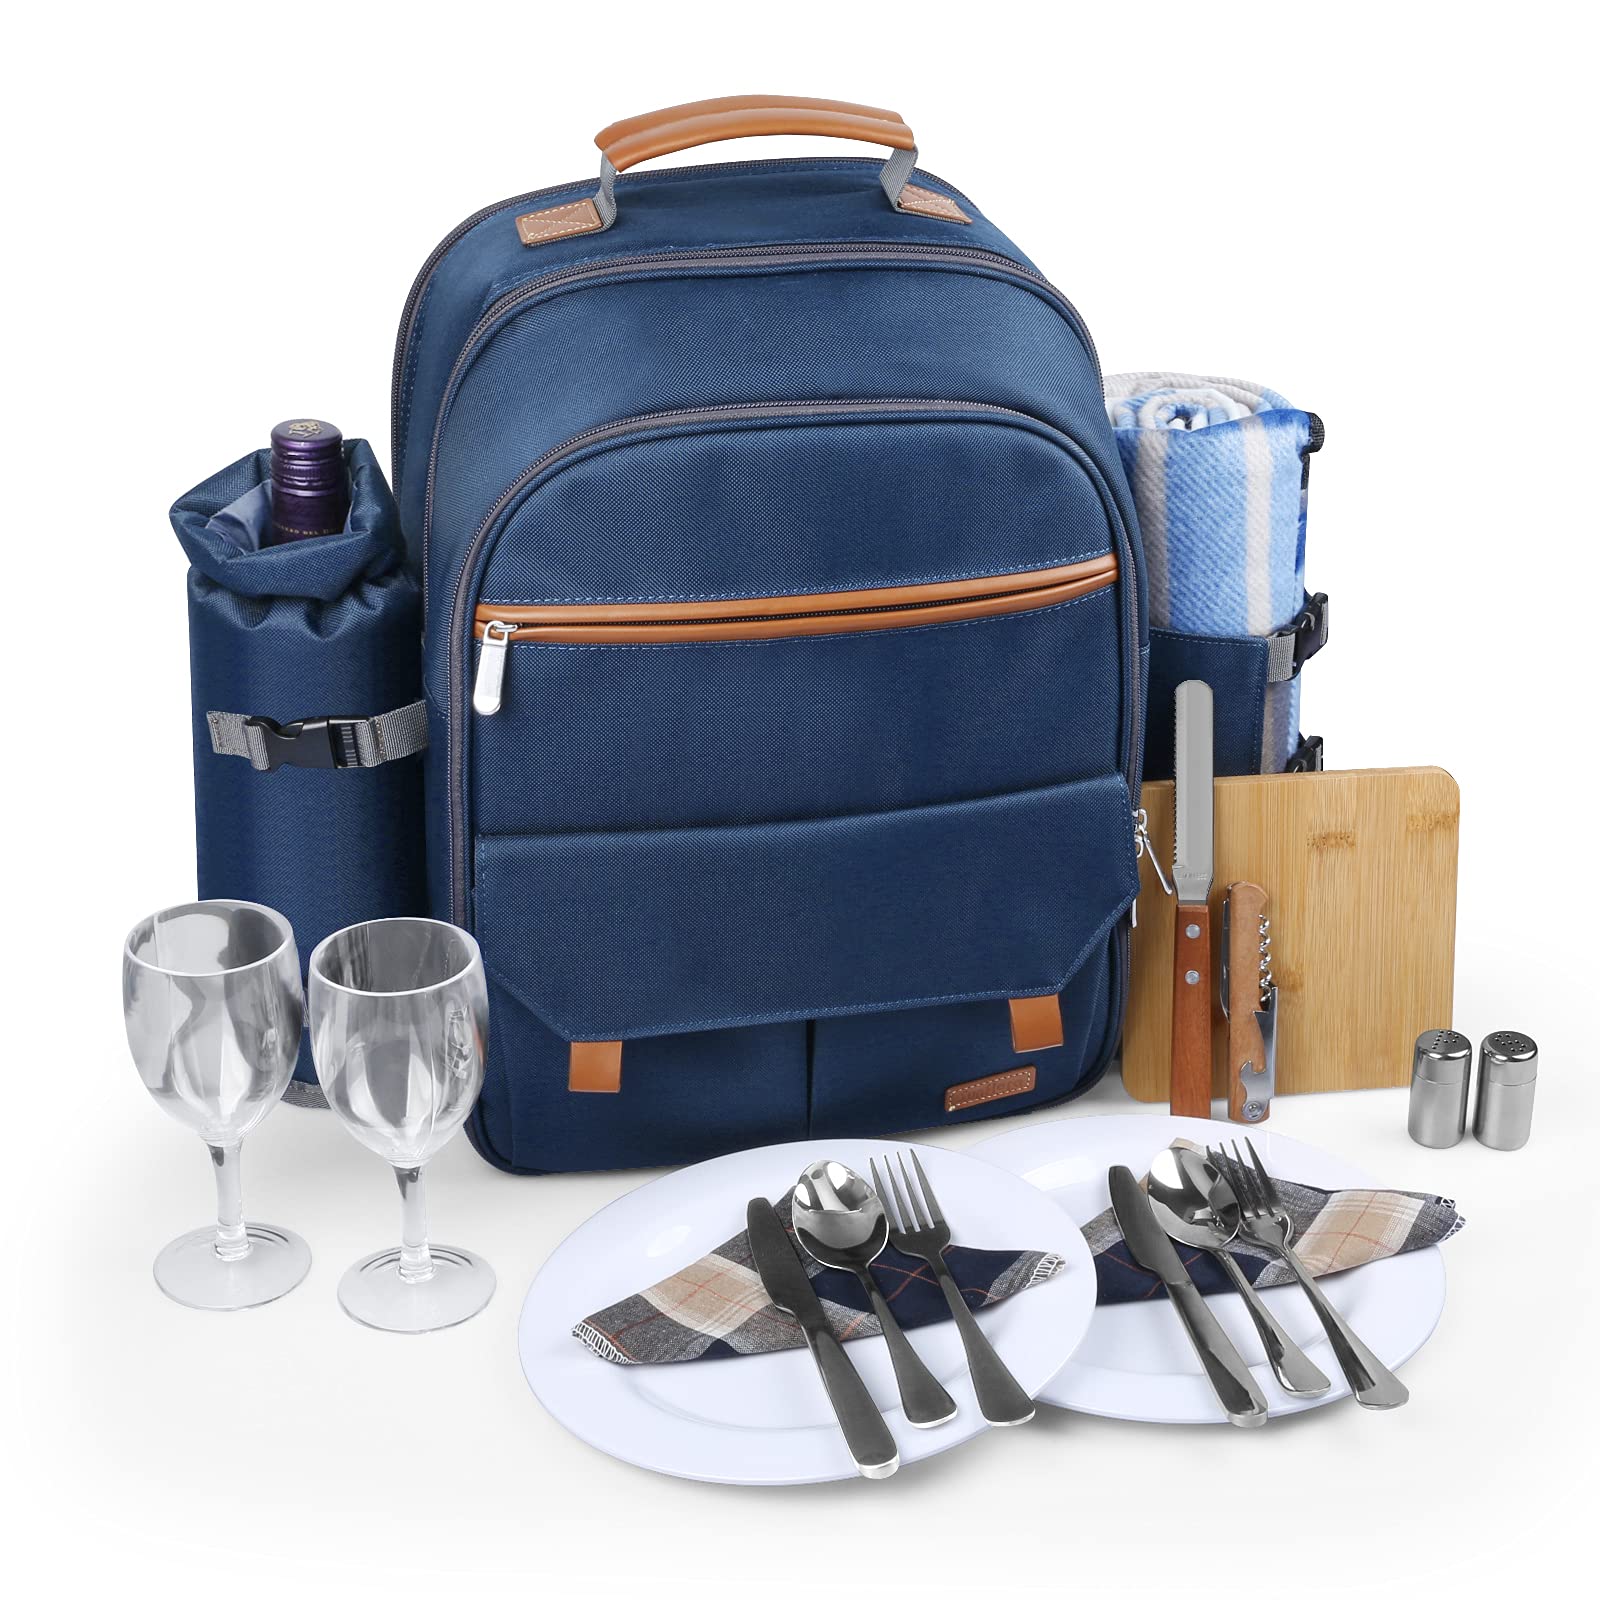 Sunflora Insulated Picnic Backpack for 2 Person Bag with Cooler Compartment, Wine pouch, Blanket and Stainless Steel Cutlery Set for Couple, Lovers and Friends (Navy)